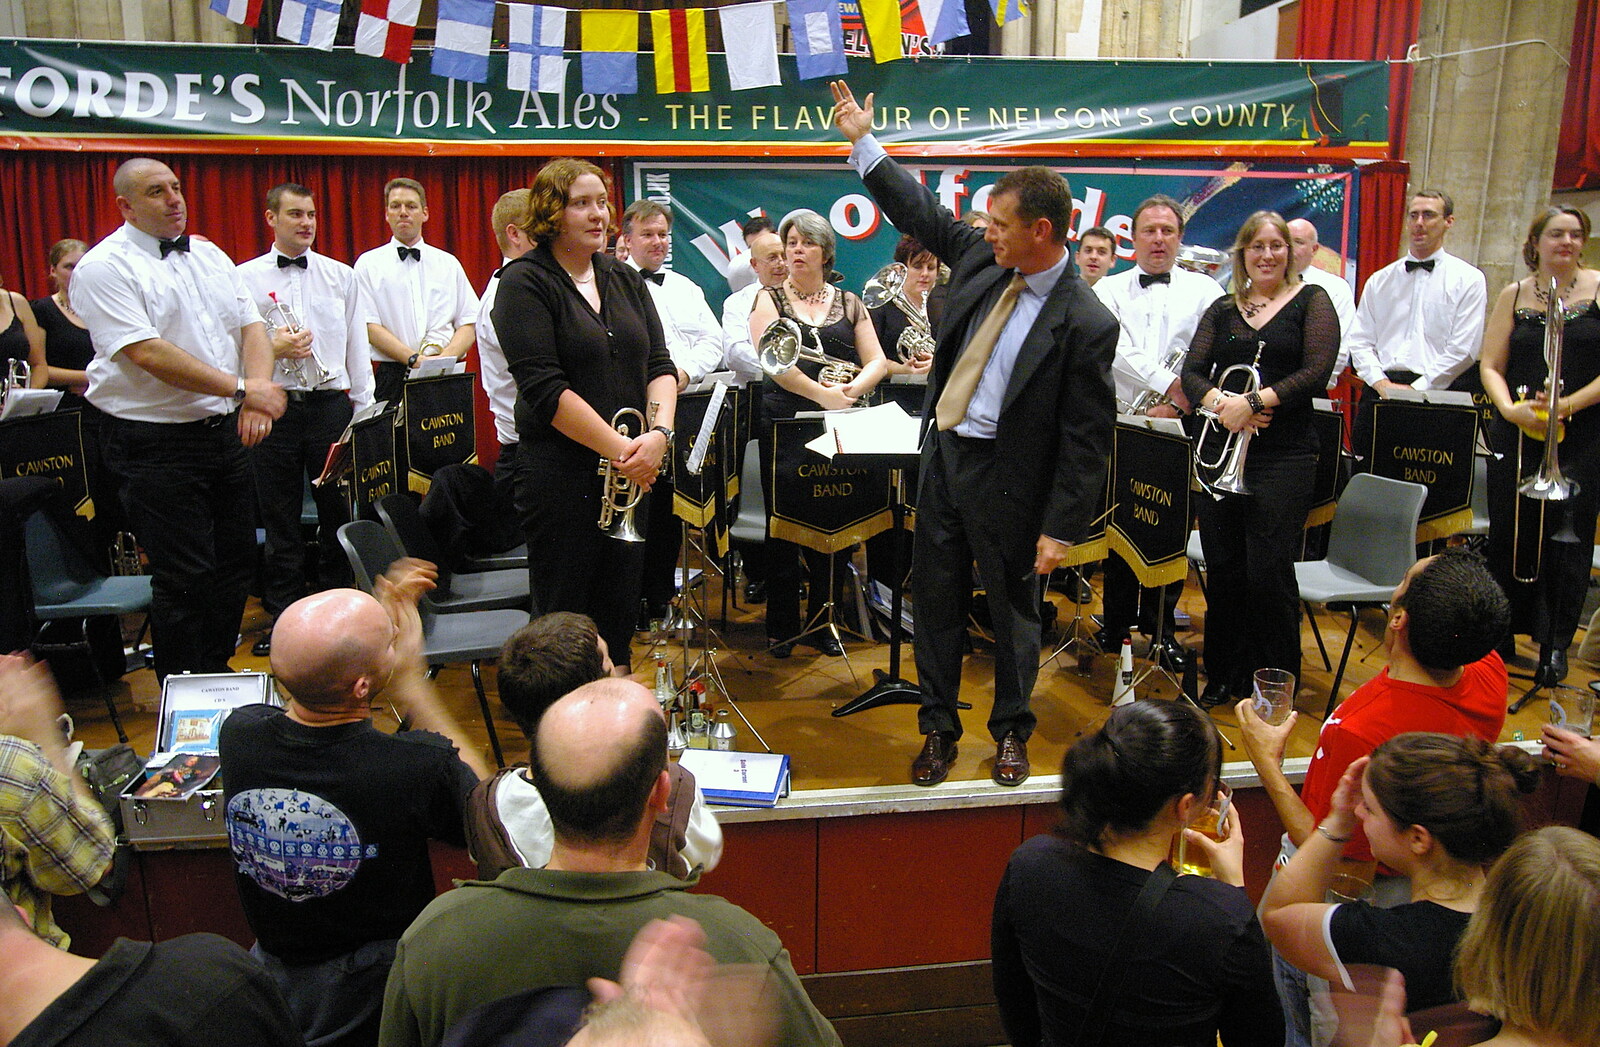 The 28th Norwich Beer Festival, St. Andrew's Hall, Norwich - 26th October 2005: The band takes the applause